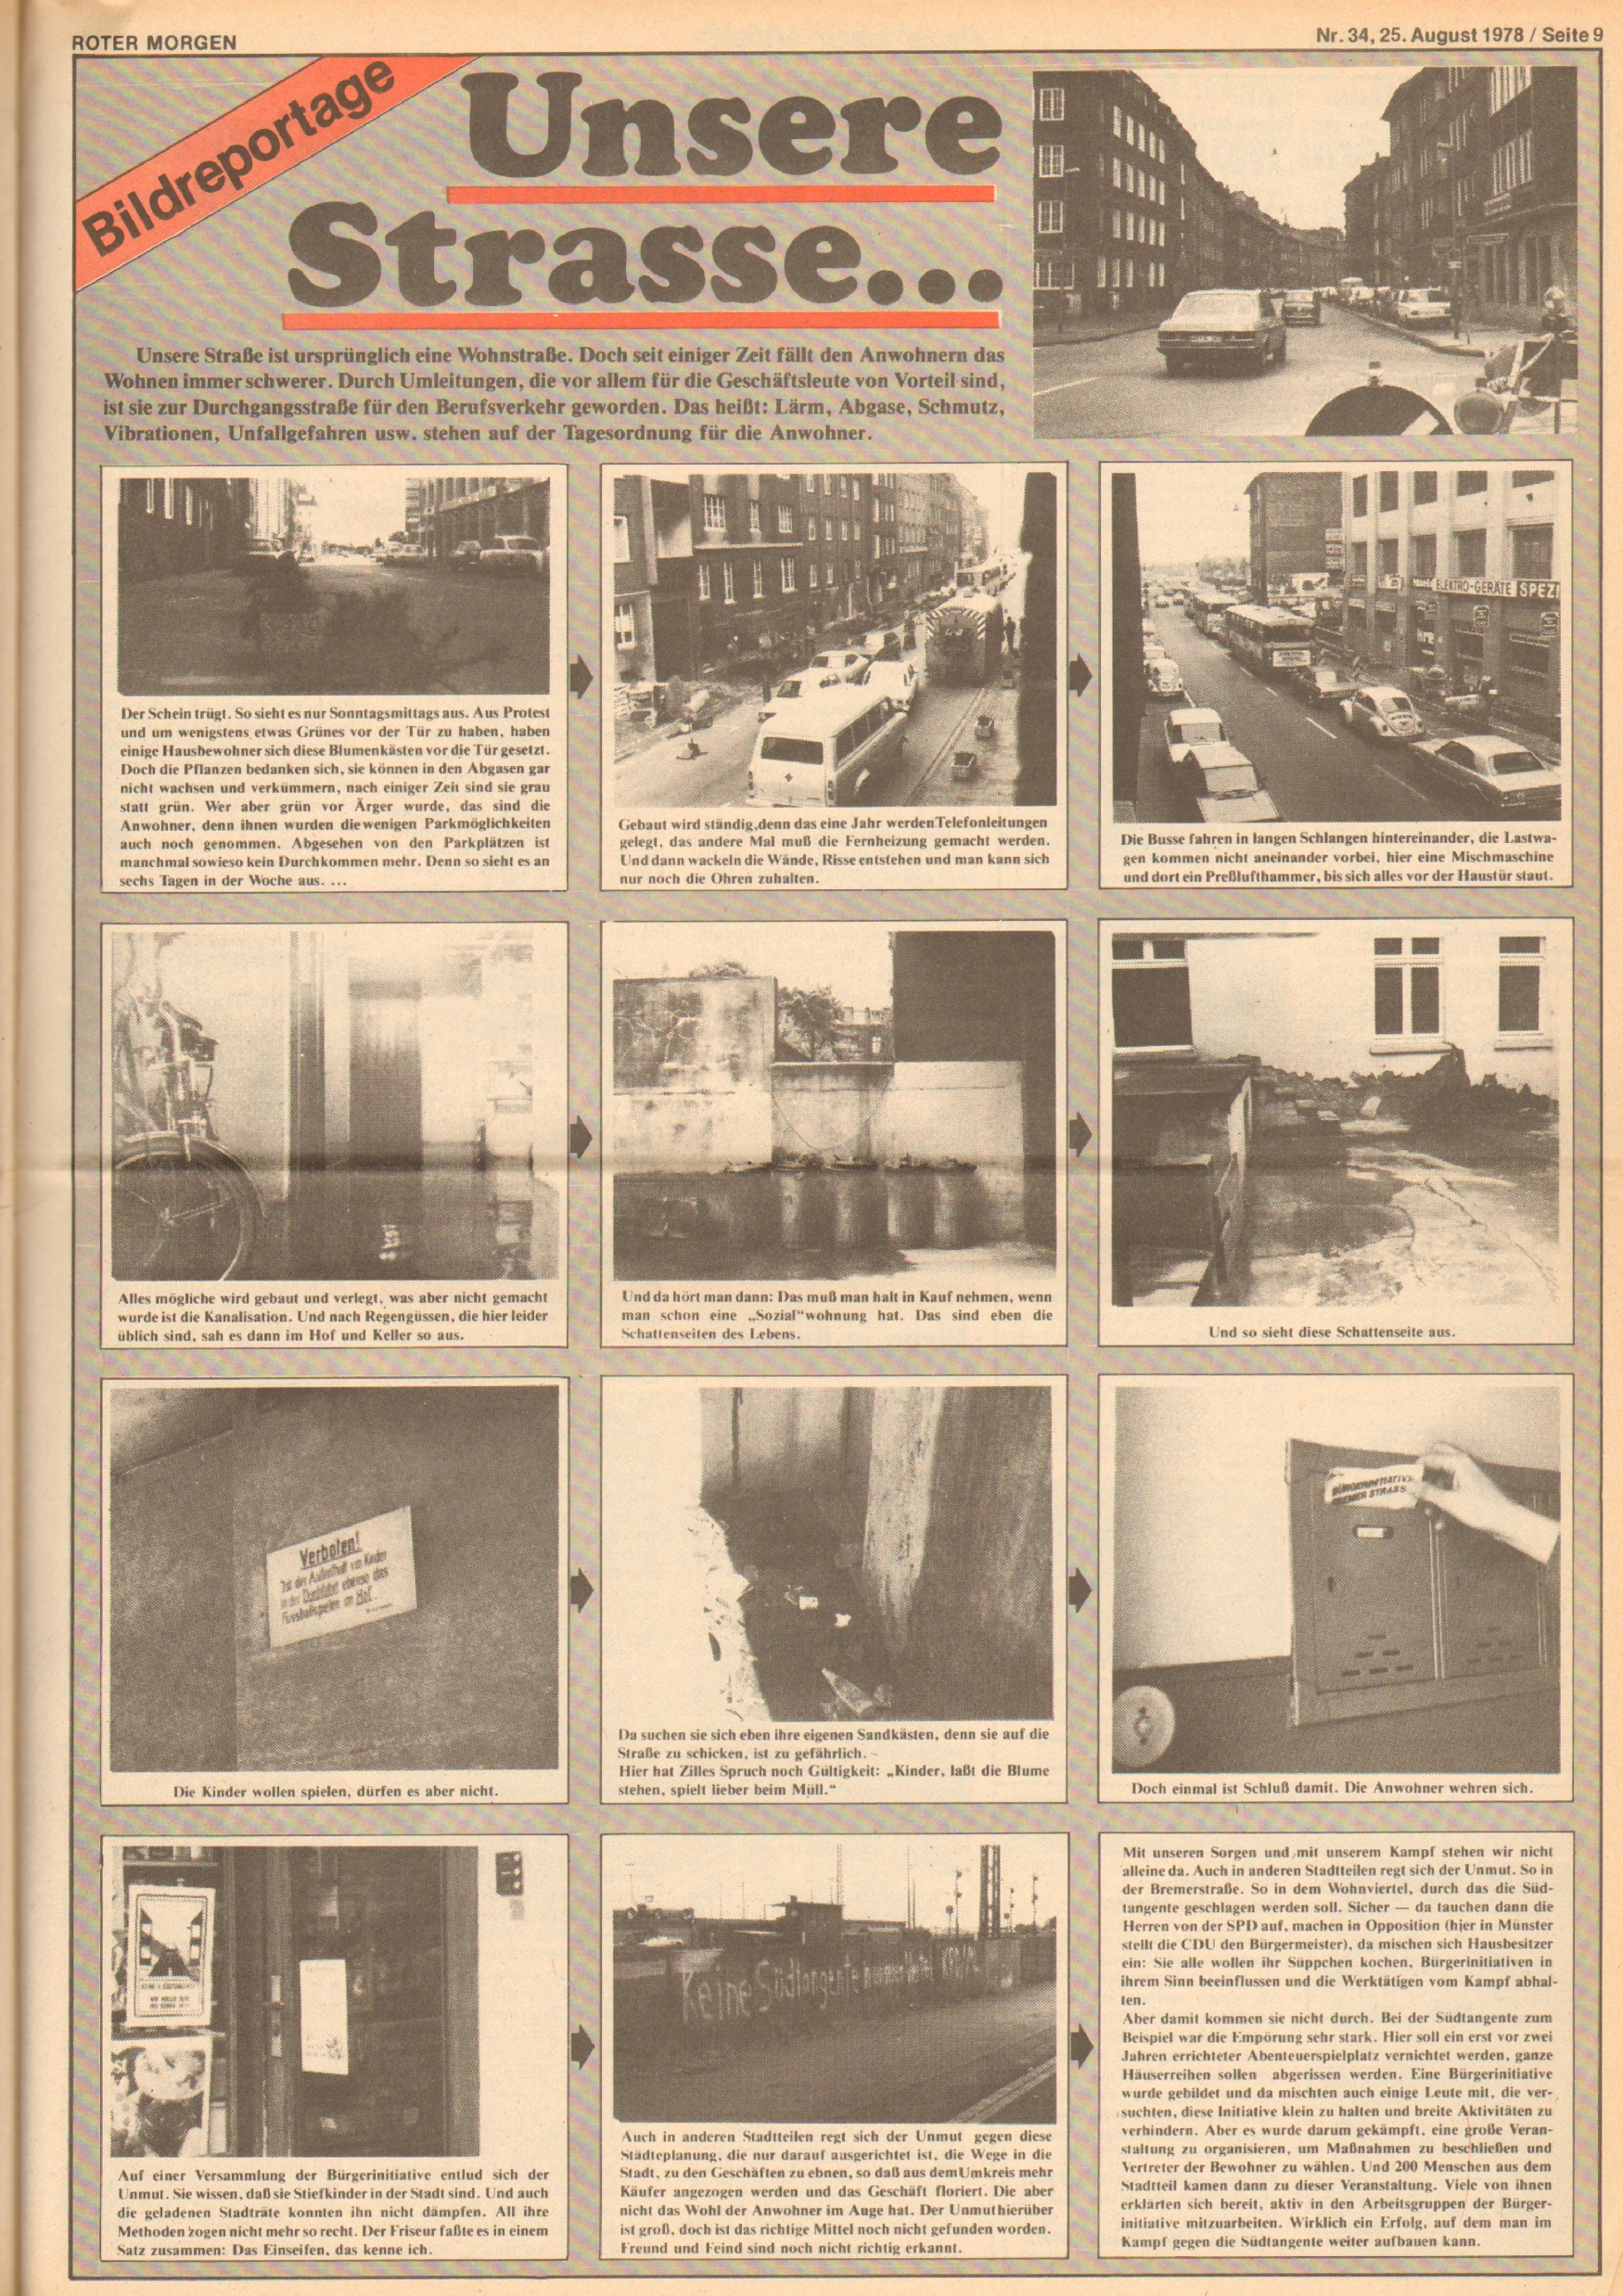 Roter Morgen, 12. Jg., 25. August 1978, Nr. 34, Seite 9